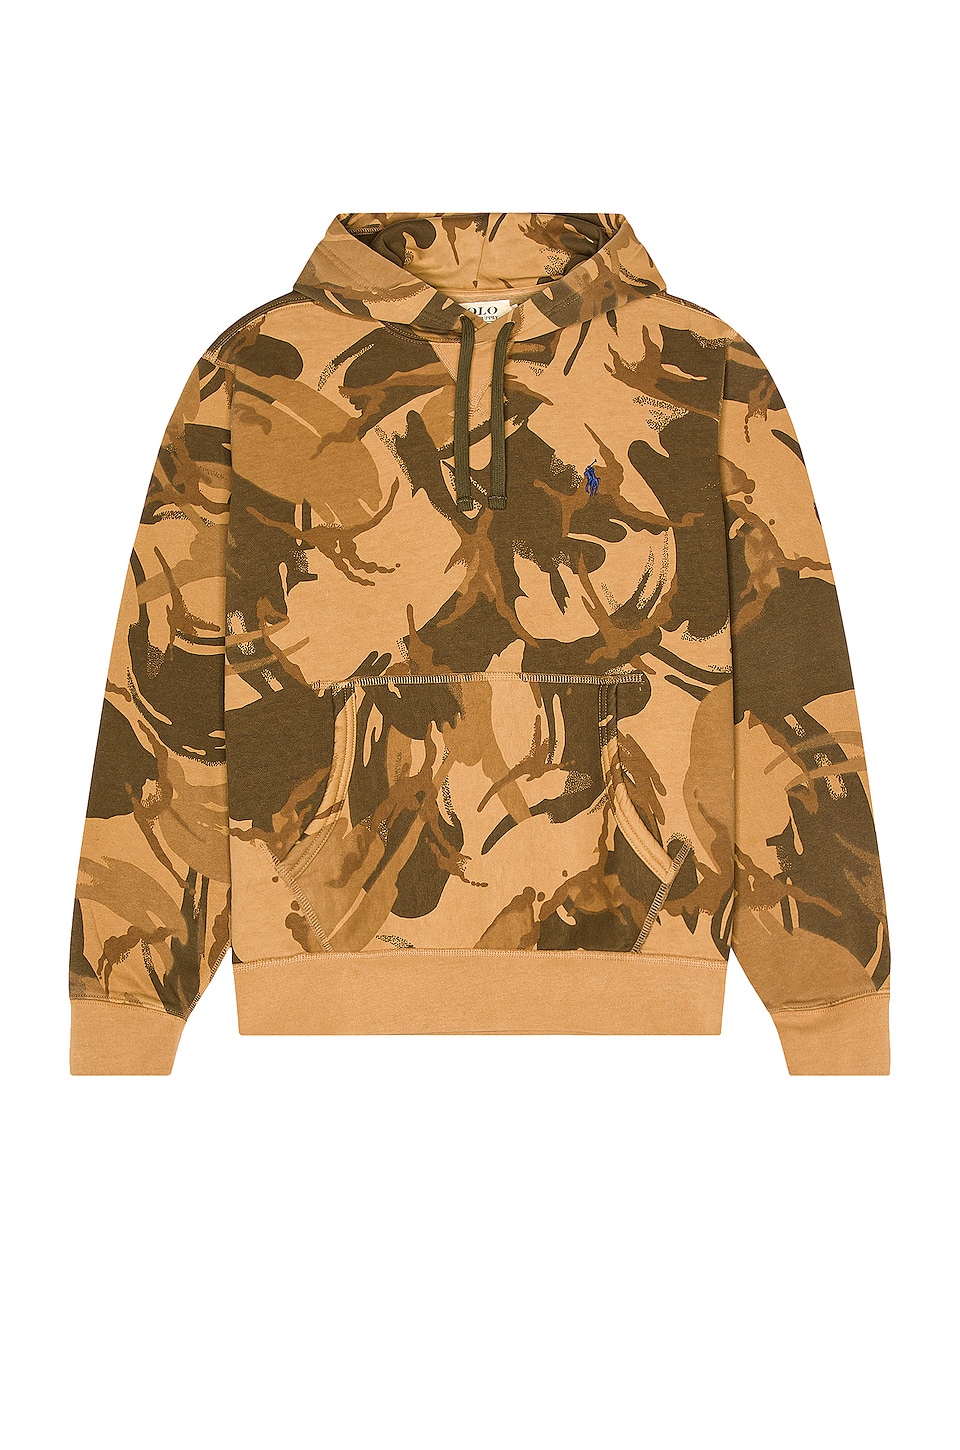 Polo Ralph Lauren Graphic Hoodie in Exploded Painted Camo | REVOLVE